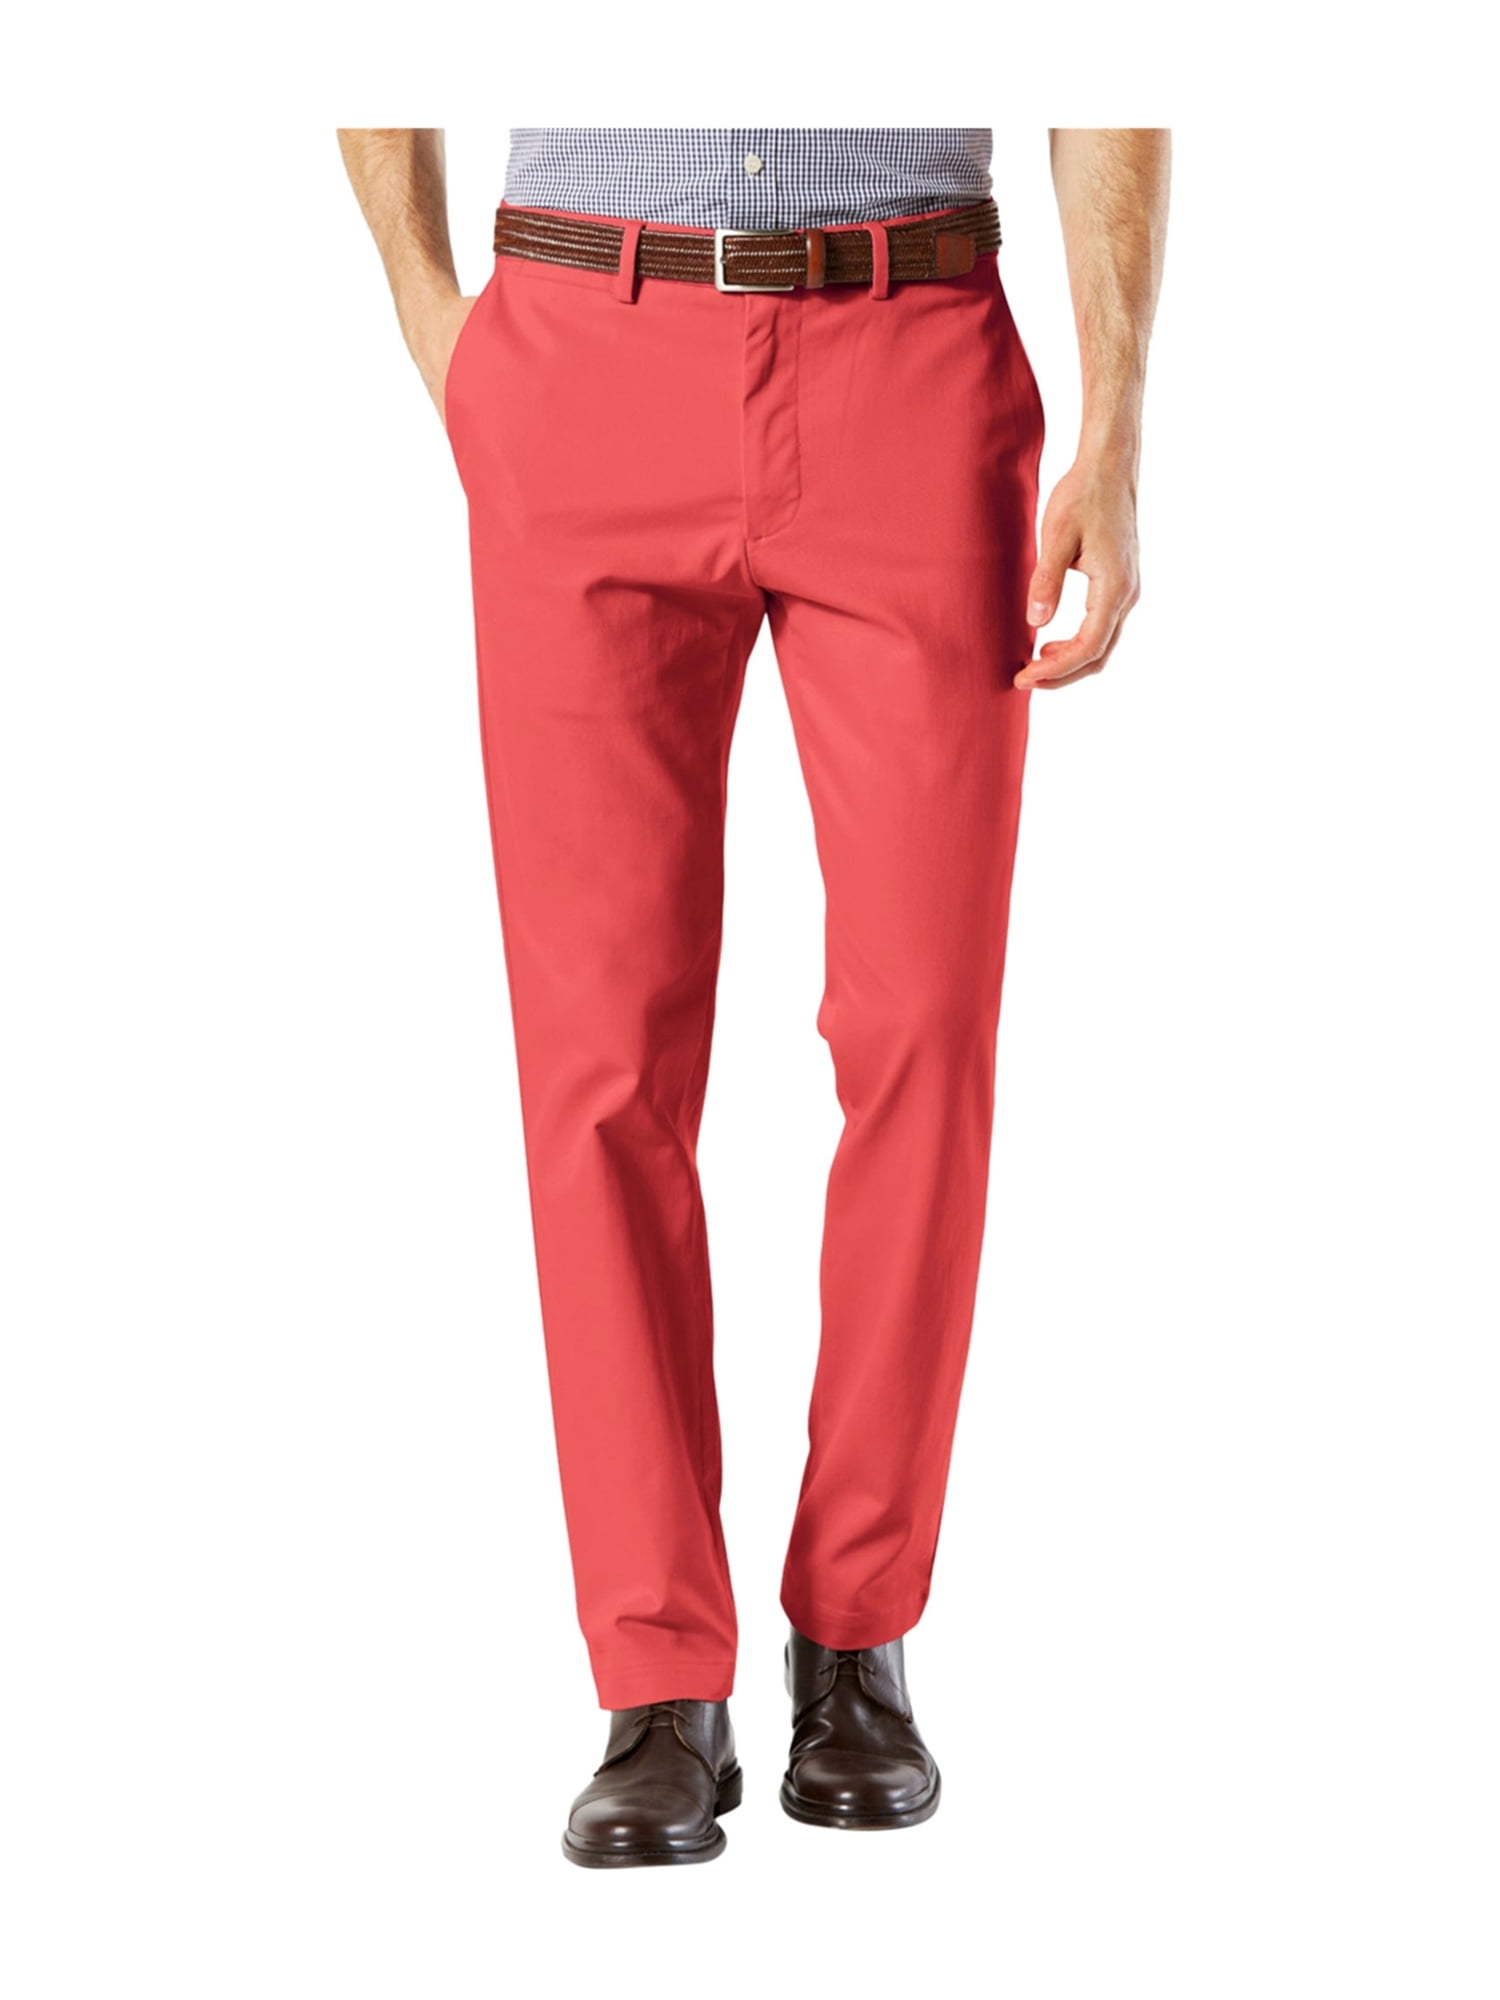 Dockers Mens Tapered Fit Casual Chino Pants red 36x32 | Walmart Canada